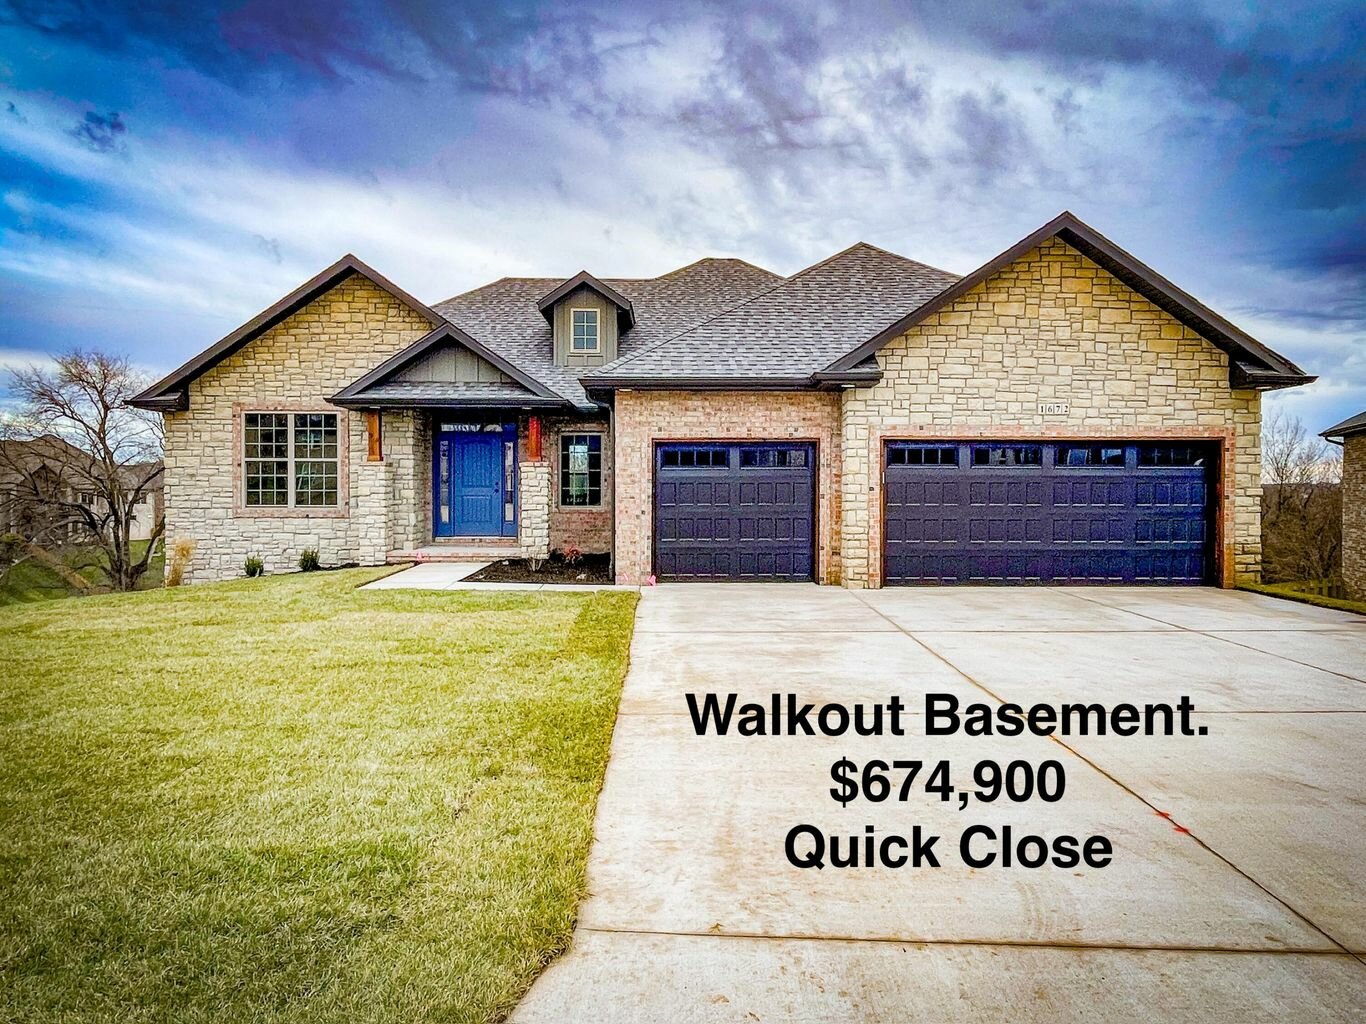 1672 W. Silver Oak Drive
$674,900
Bedrooms: 5
Bathrooms: 4
Listing firm: Old World Realty LLC